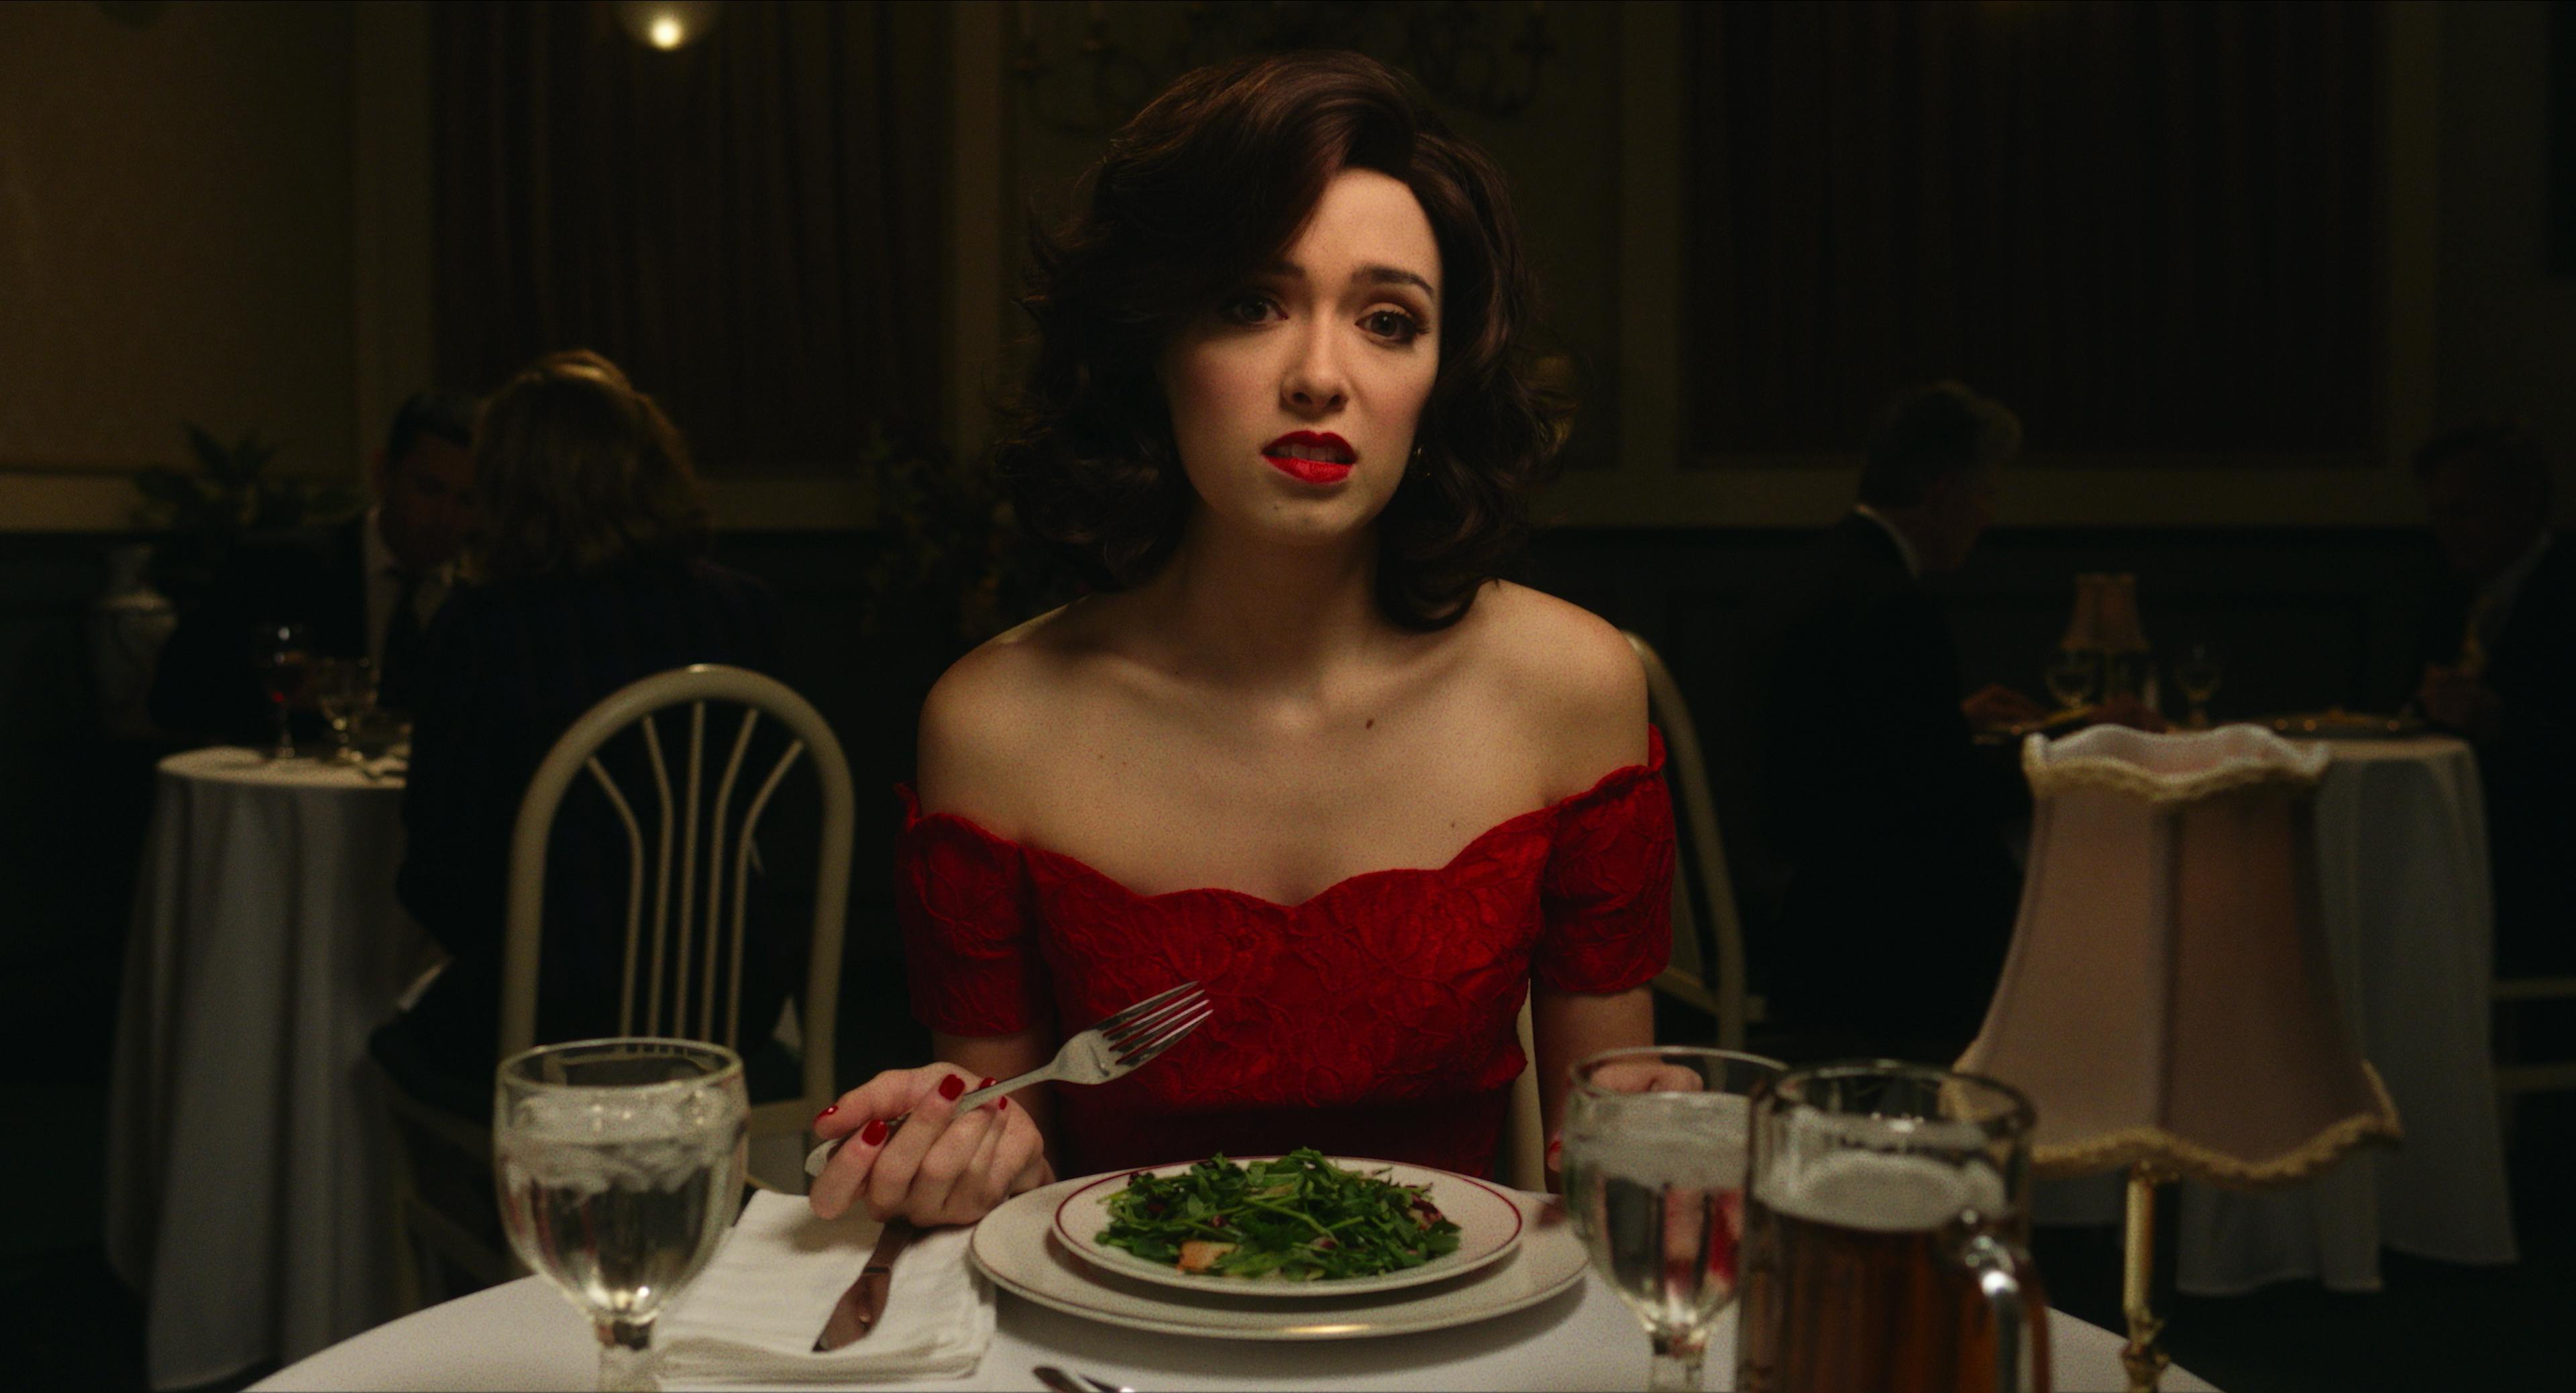 A woman in a red dress with makeup eats a salad